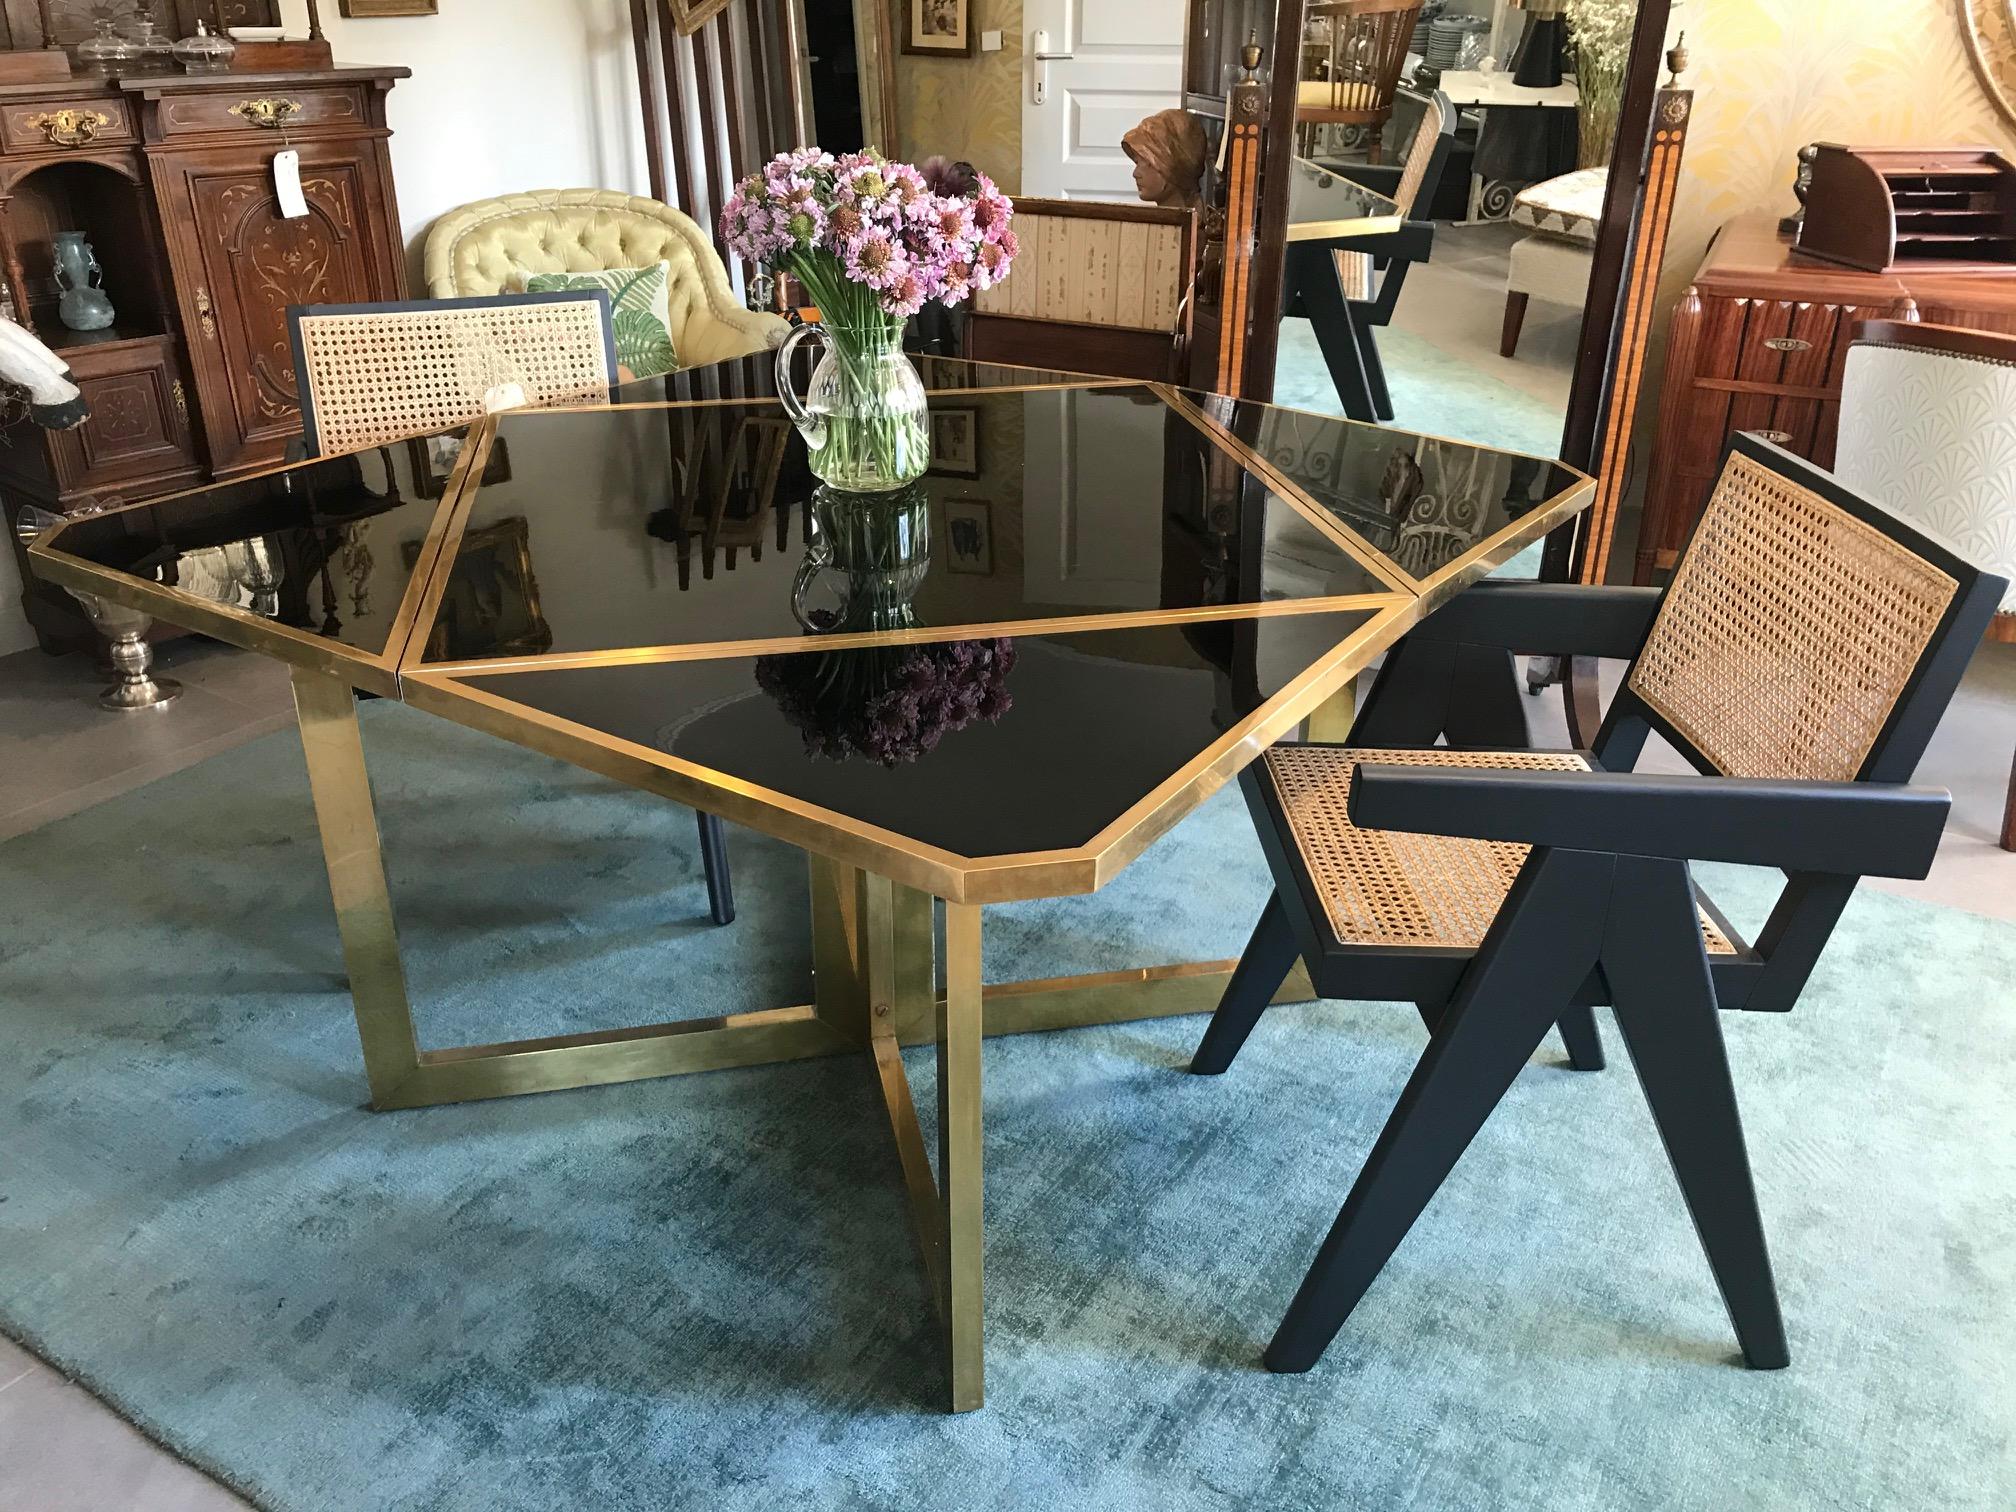 Beautiful and inventive table designed by the Italian Romeo Rega made with brass and black lacquer from the 1970s.
High quality materials, gilted brass cross structure and black lacquer top.
This square table is folding in four parts, either for